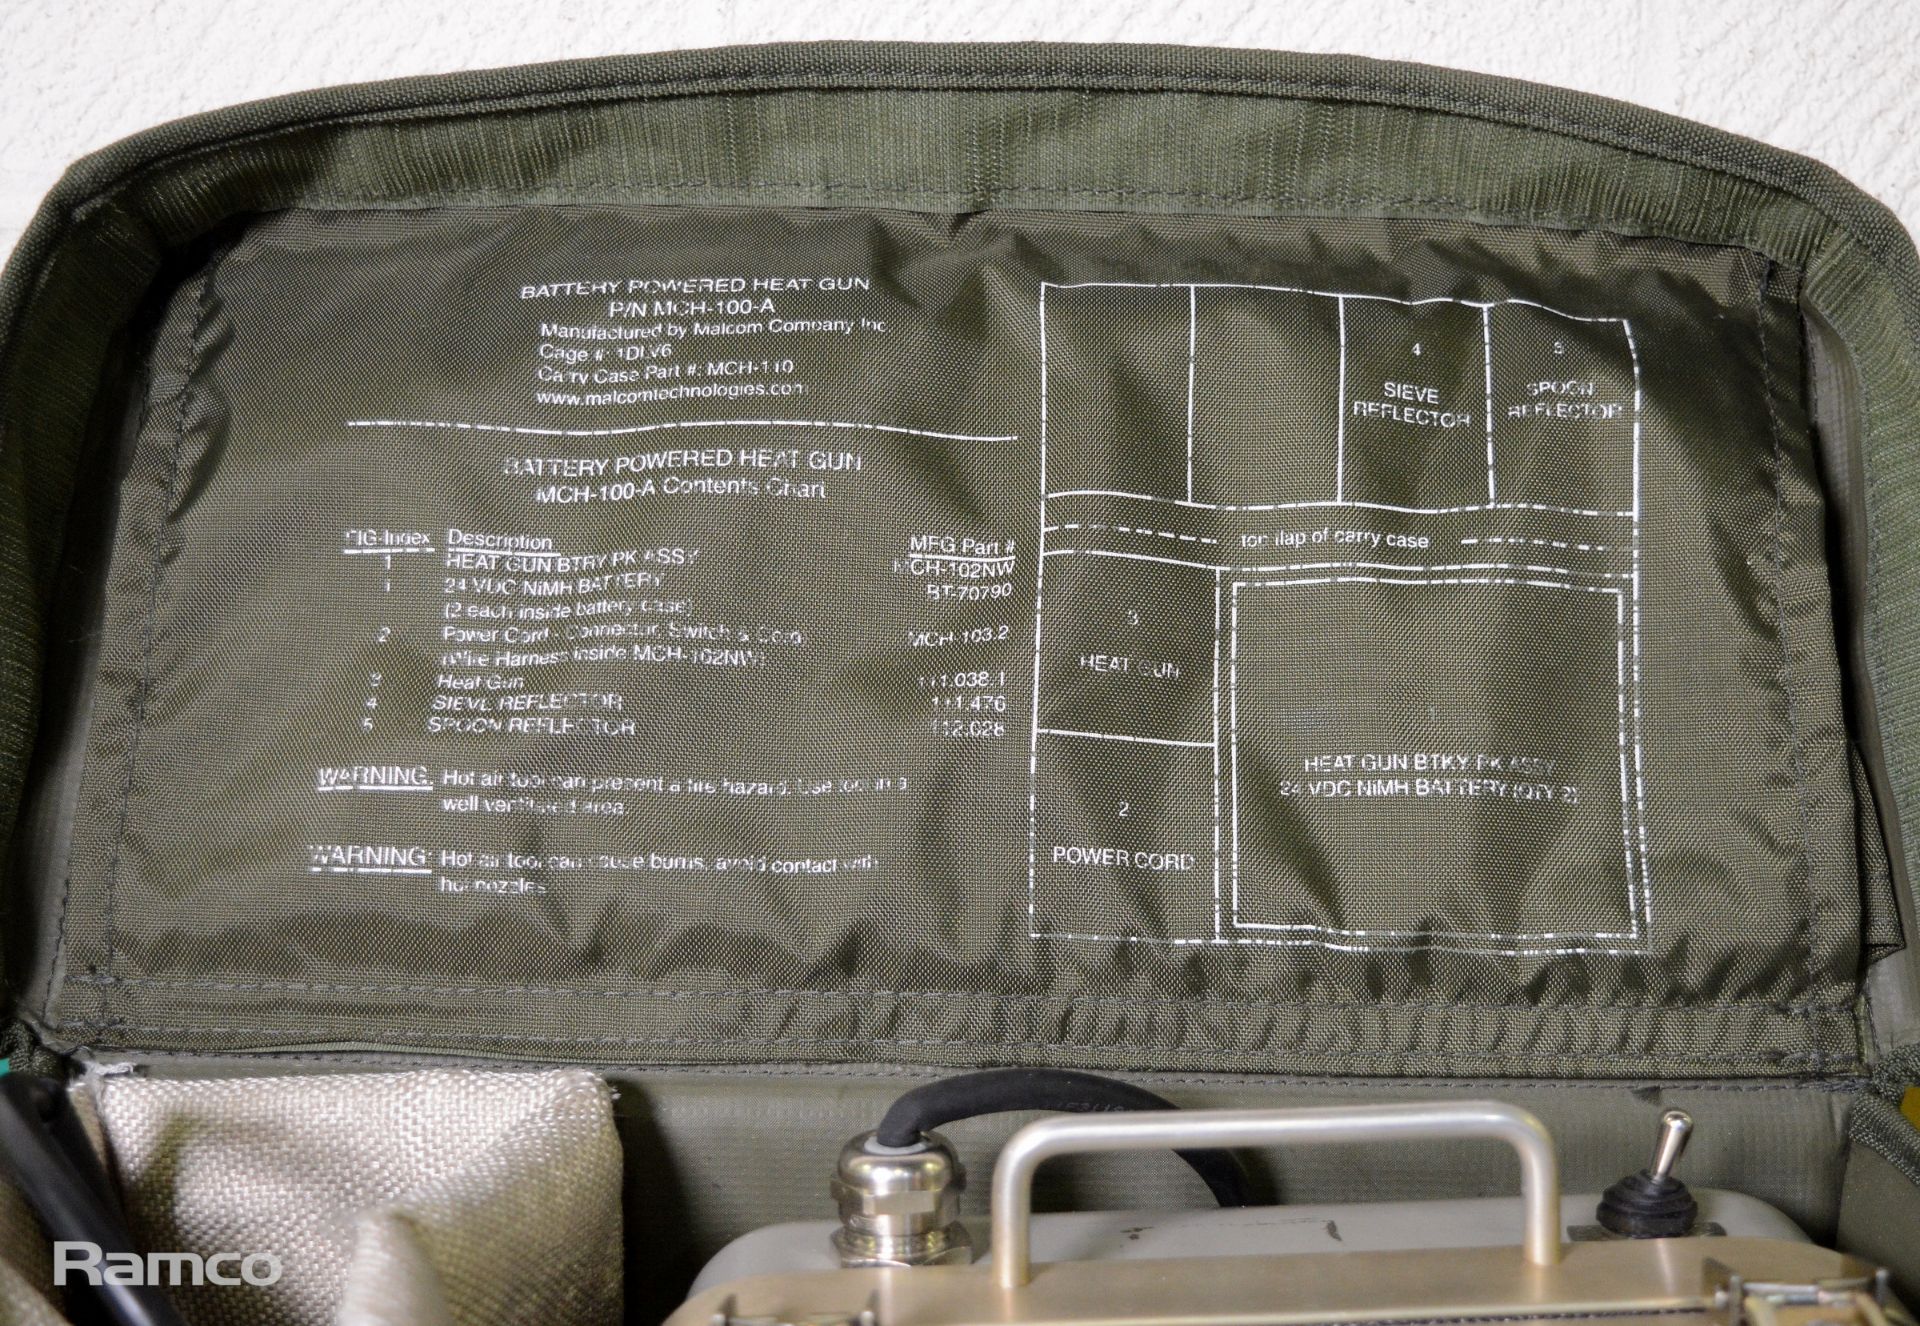 Military battery heat gun in carry case - Image 6 of 6